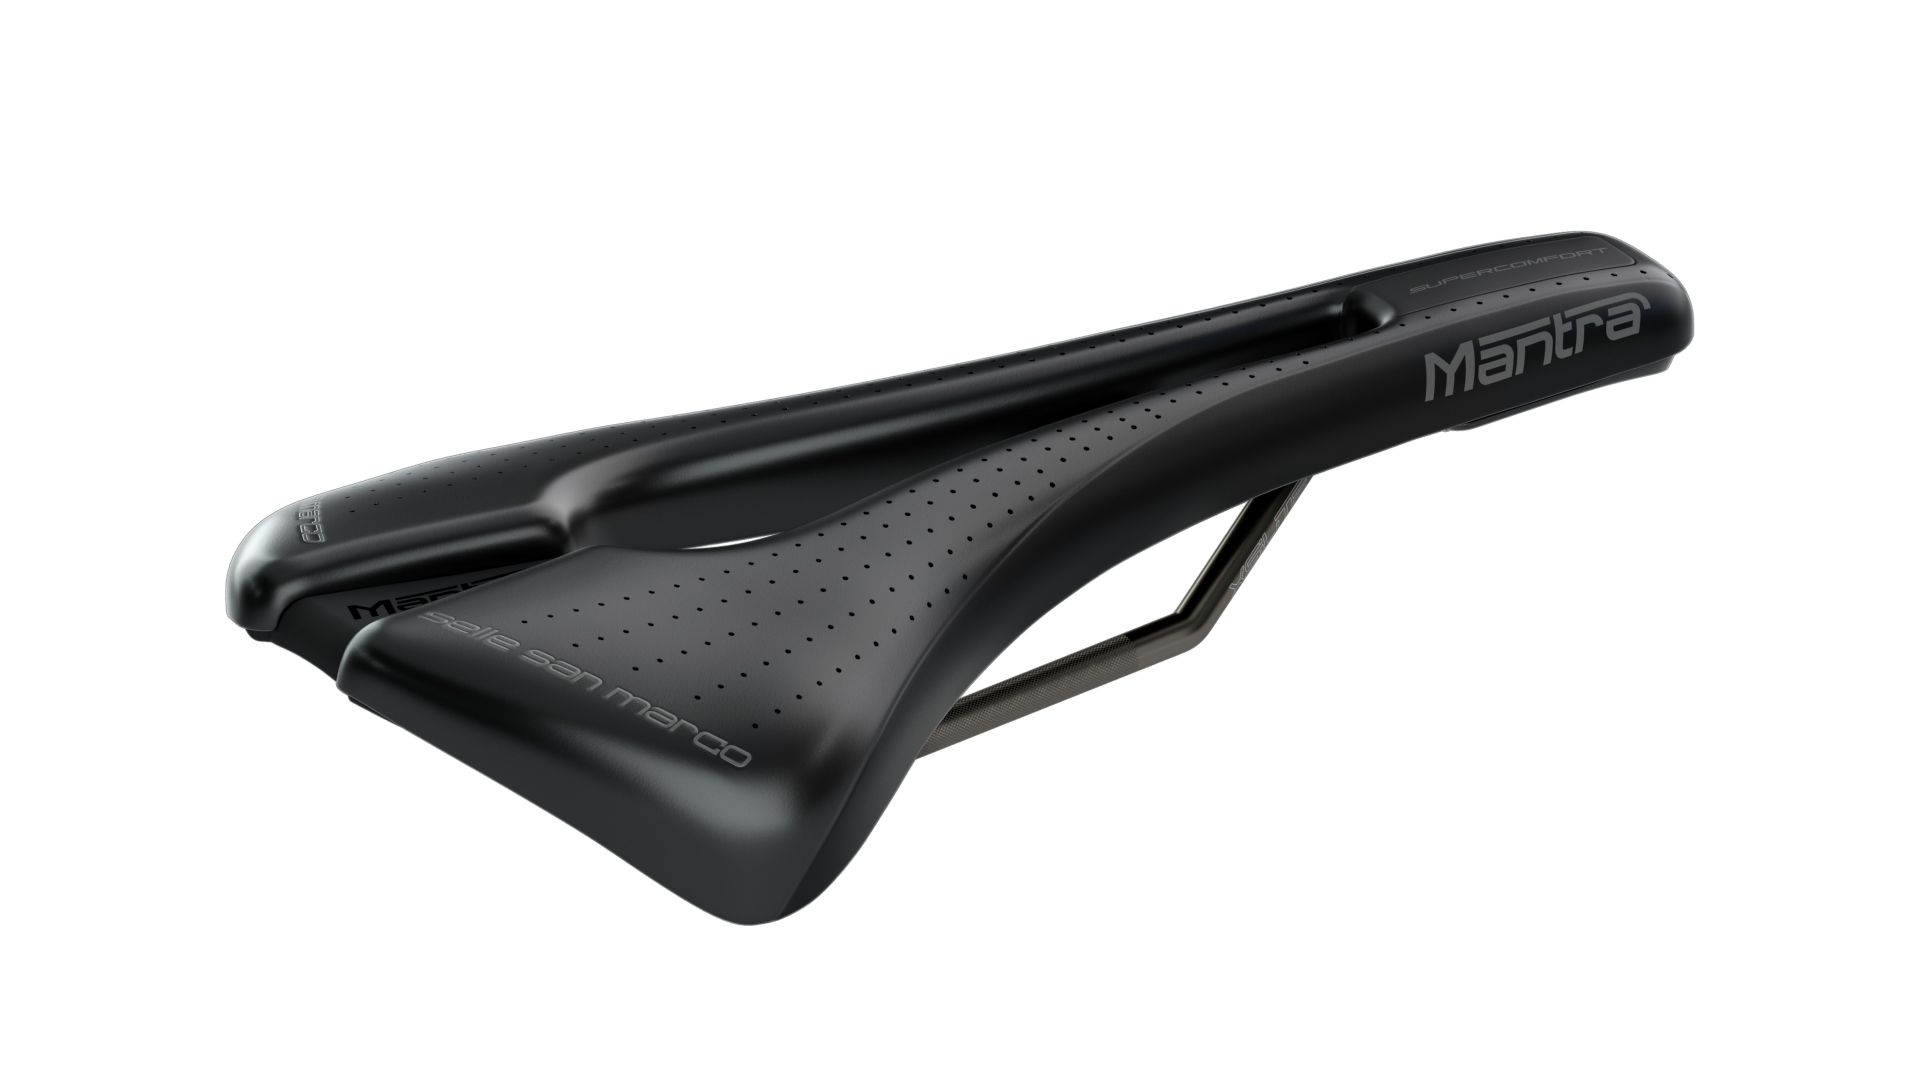 Selle San Marco adds Supercomfort model to its Mantra saddle collection